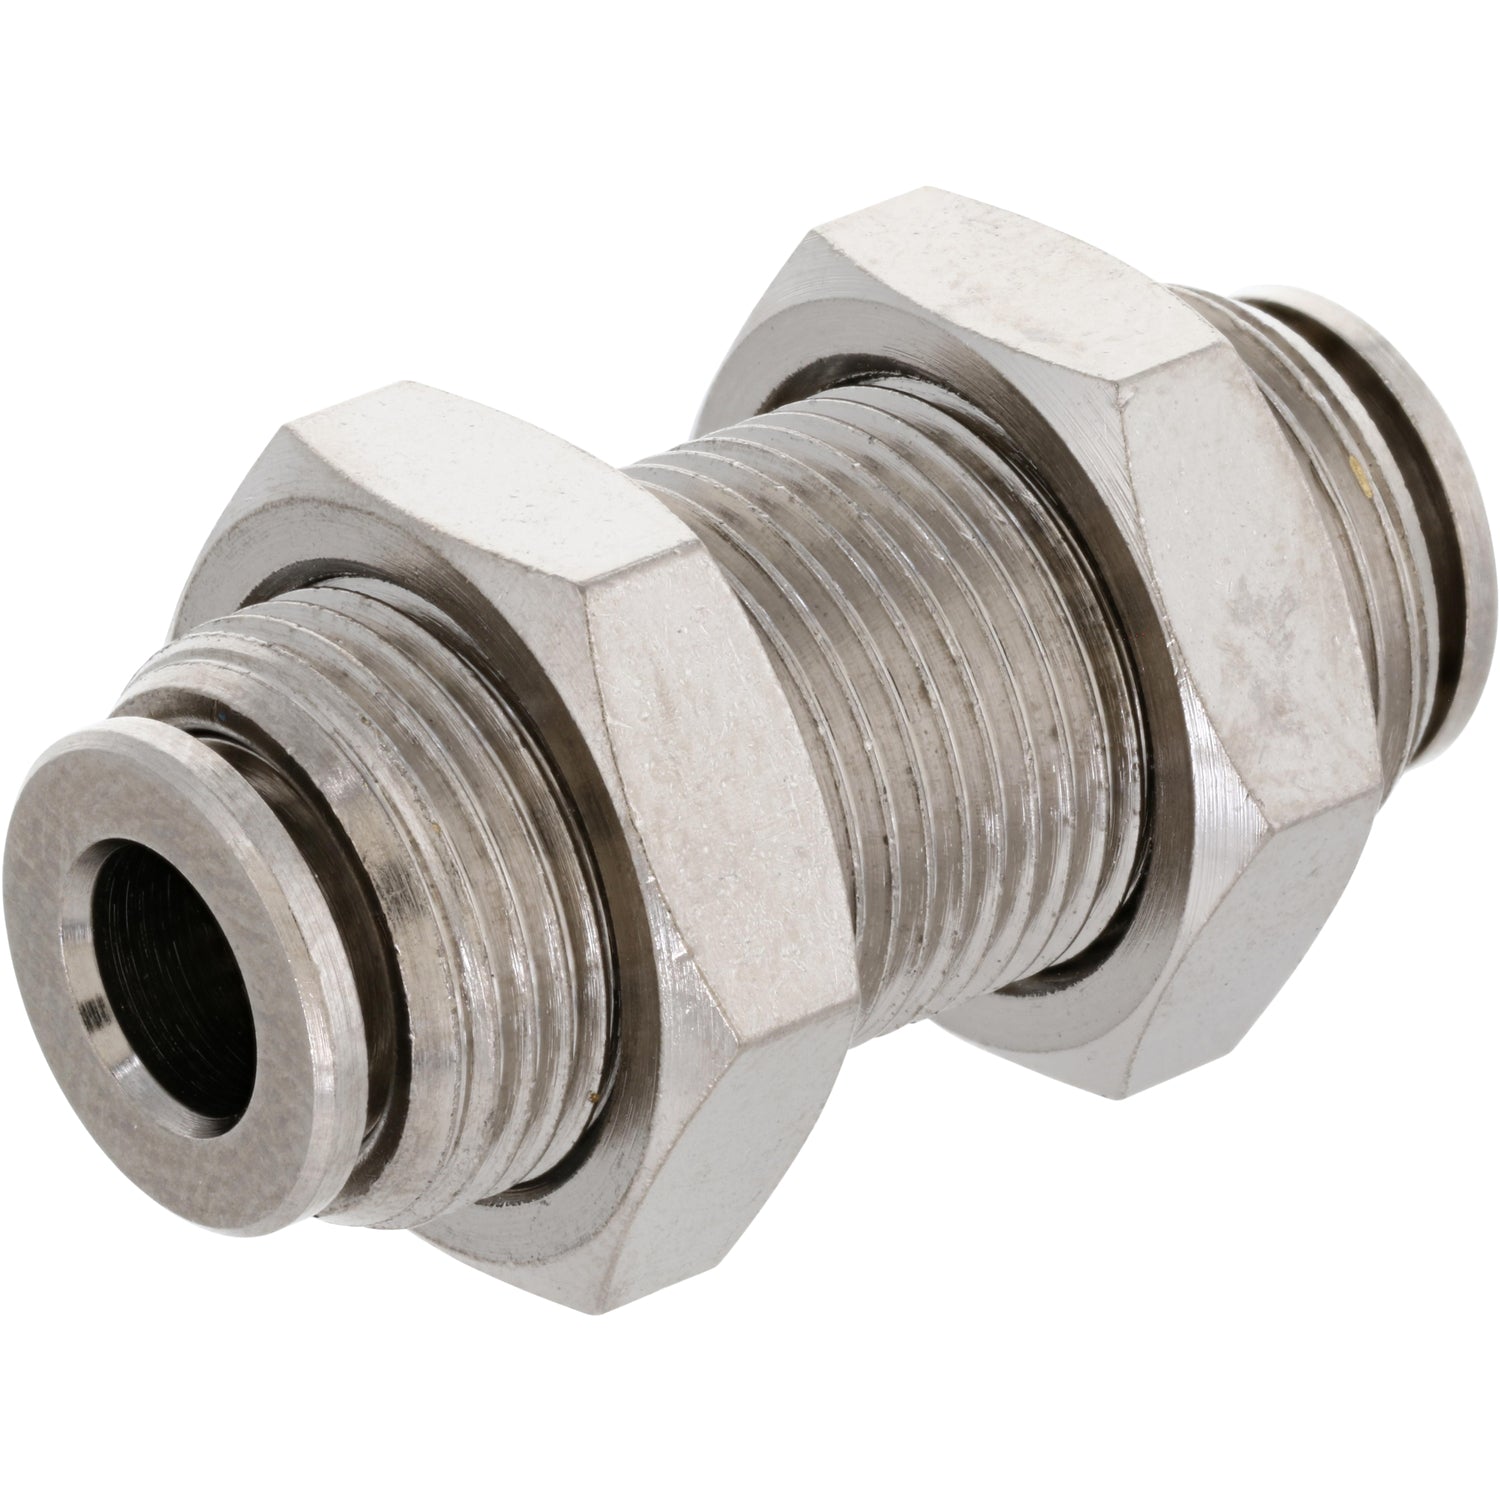 Threaded nickel-plated brass push-in bulkhead connector on white background. 